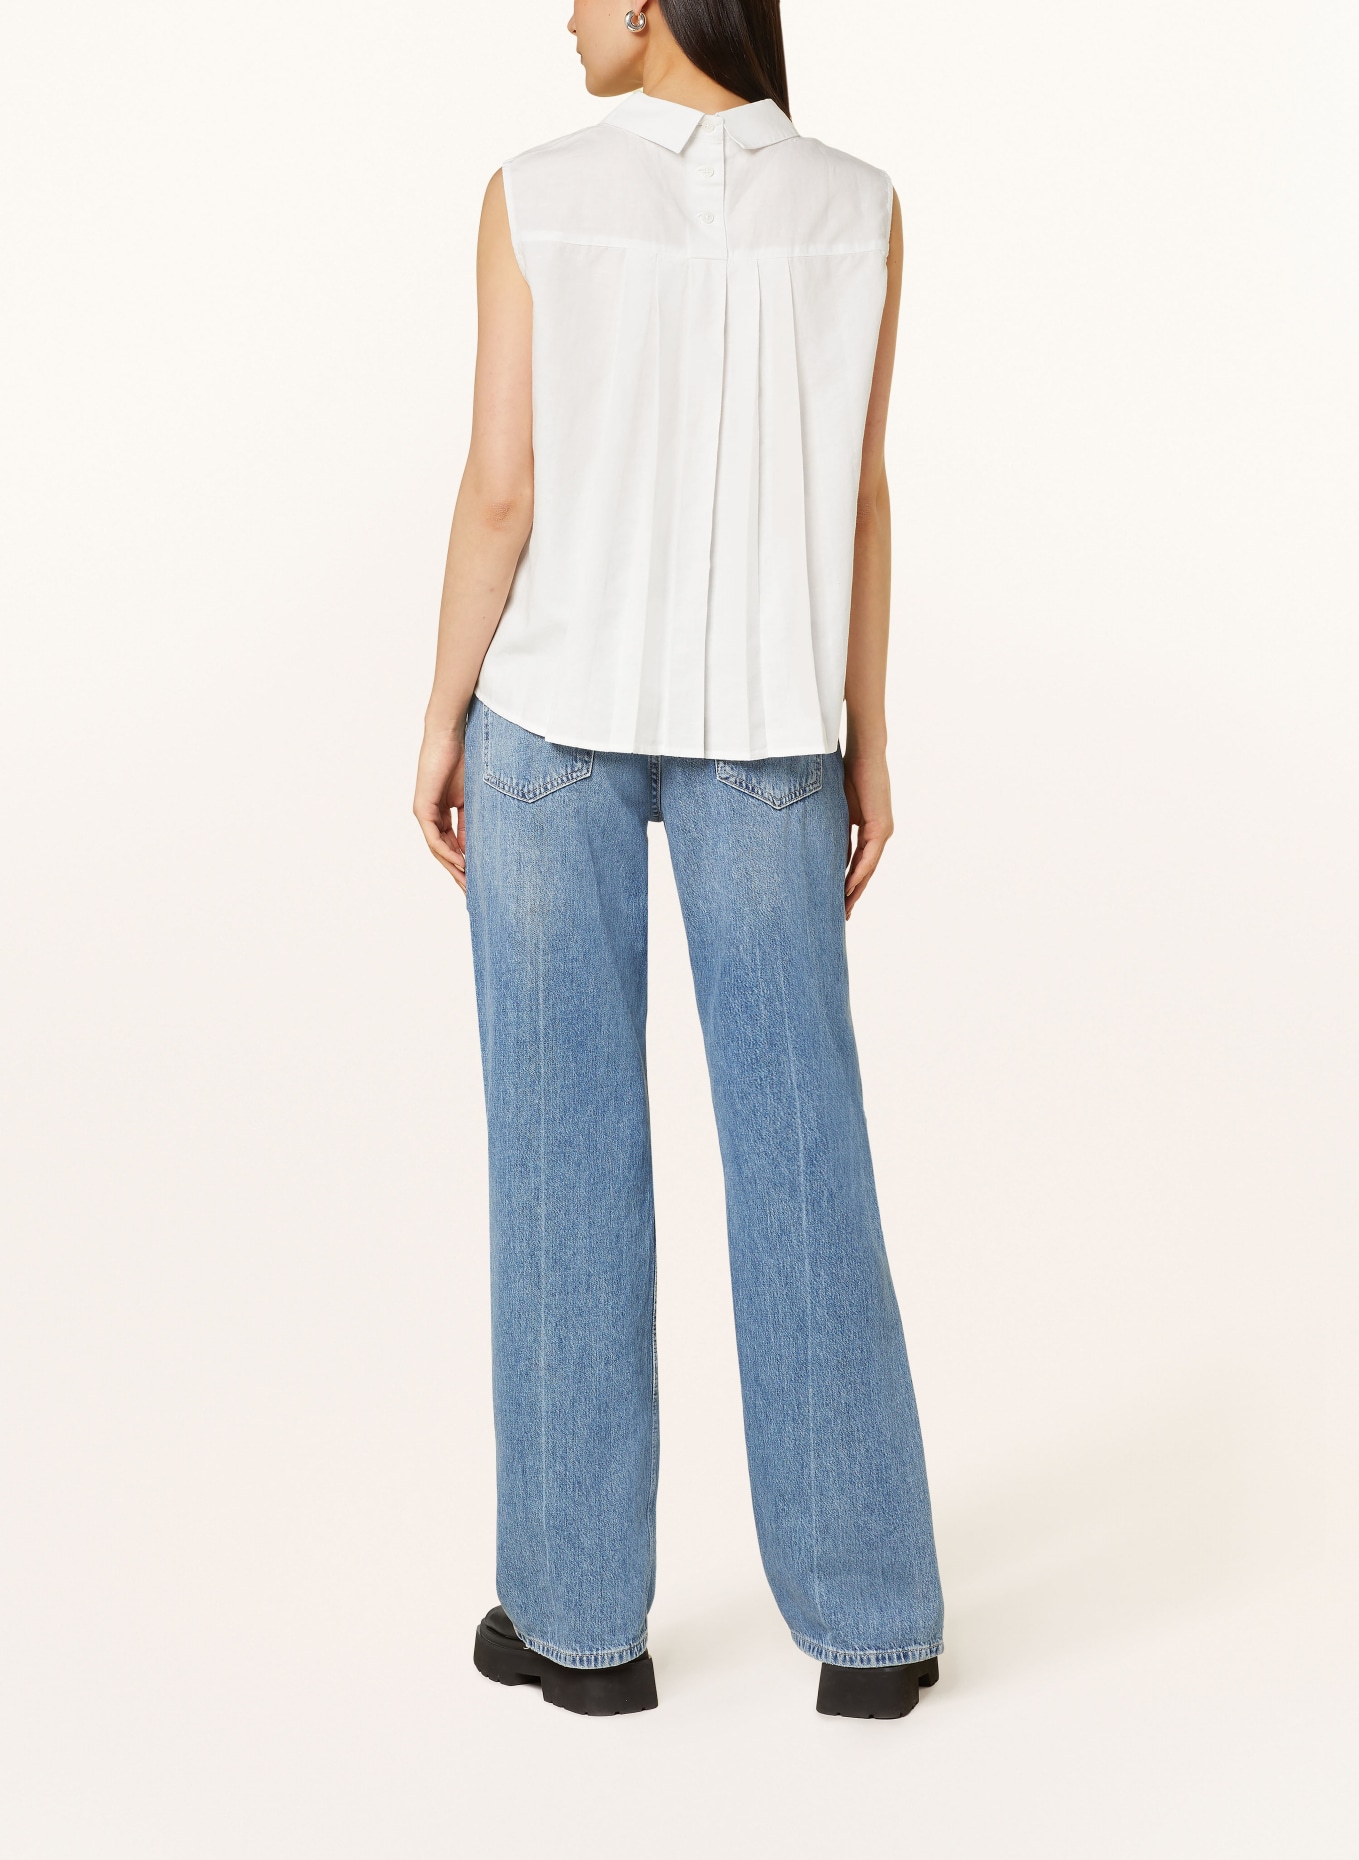 Marc O'Polo DENIM Blouse top WOVEN with linen, Color: WHITE (Image 3)